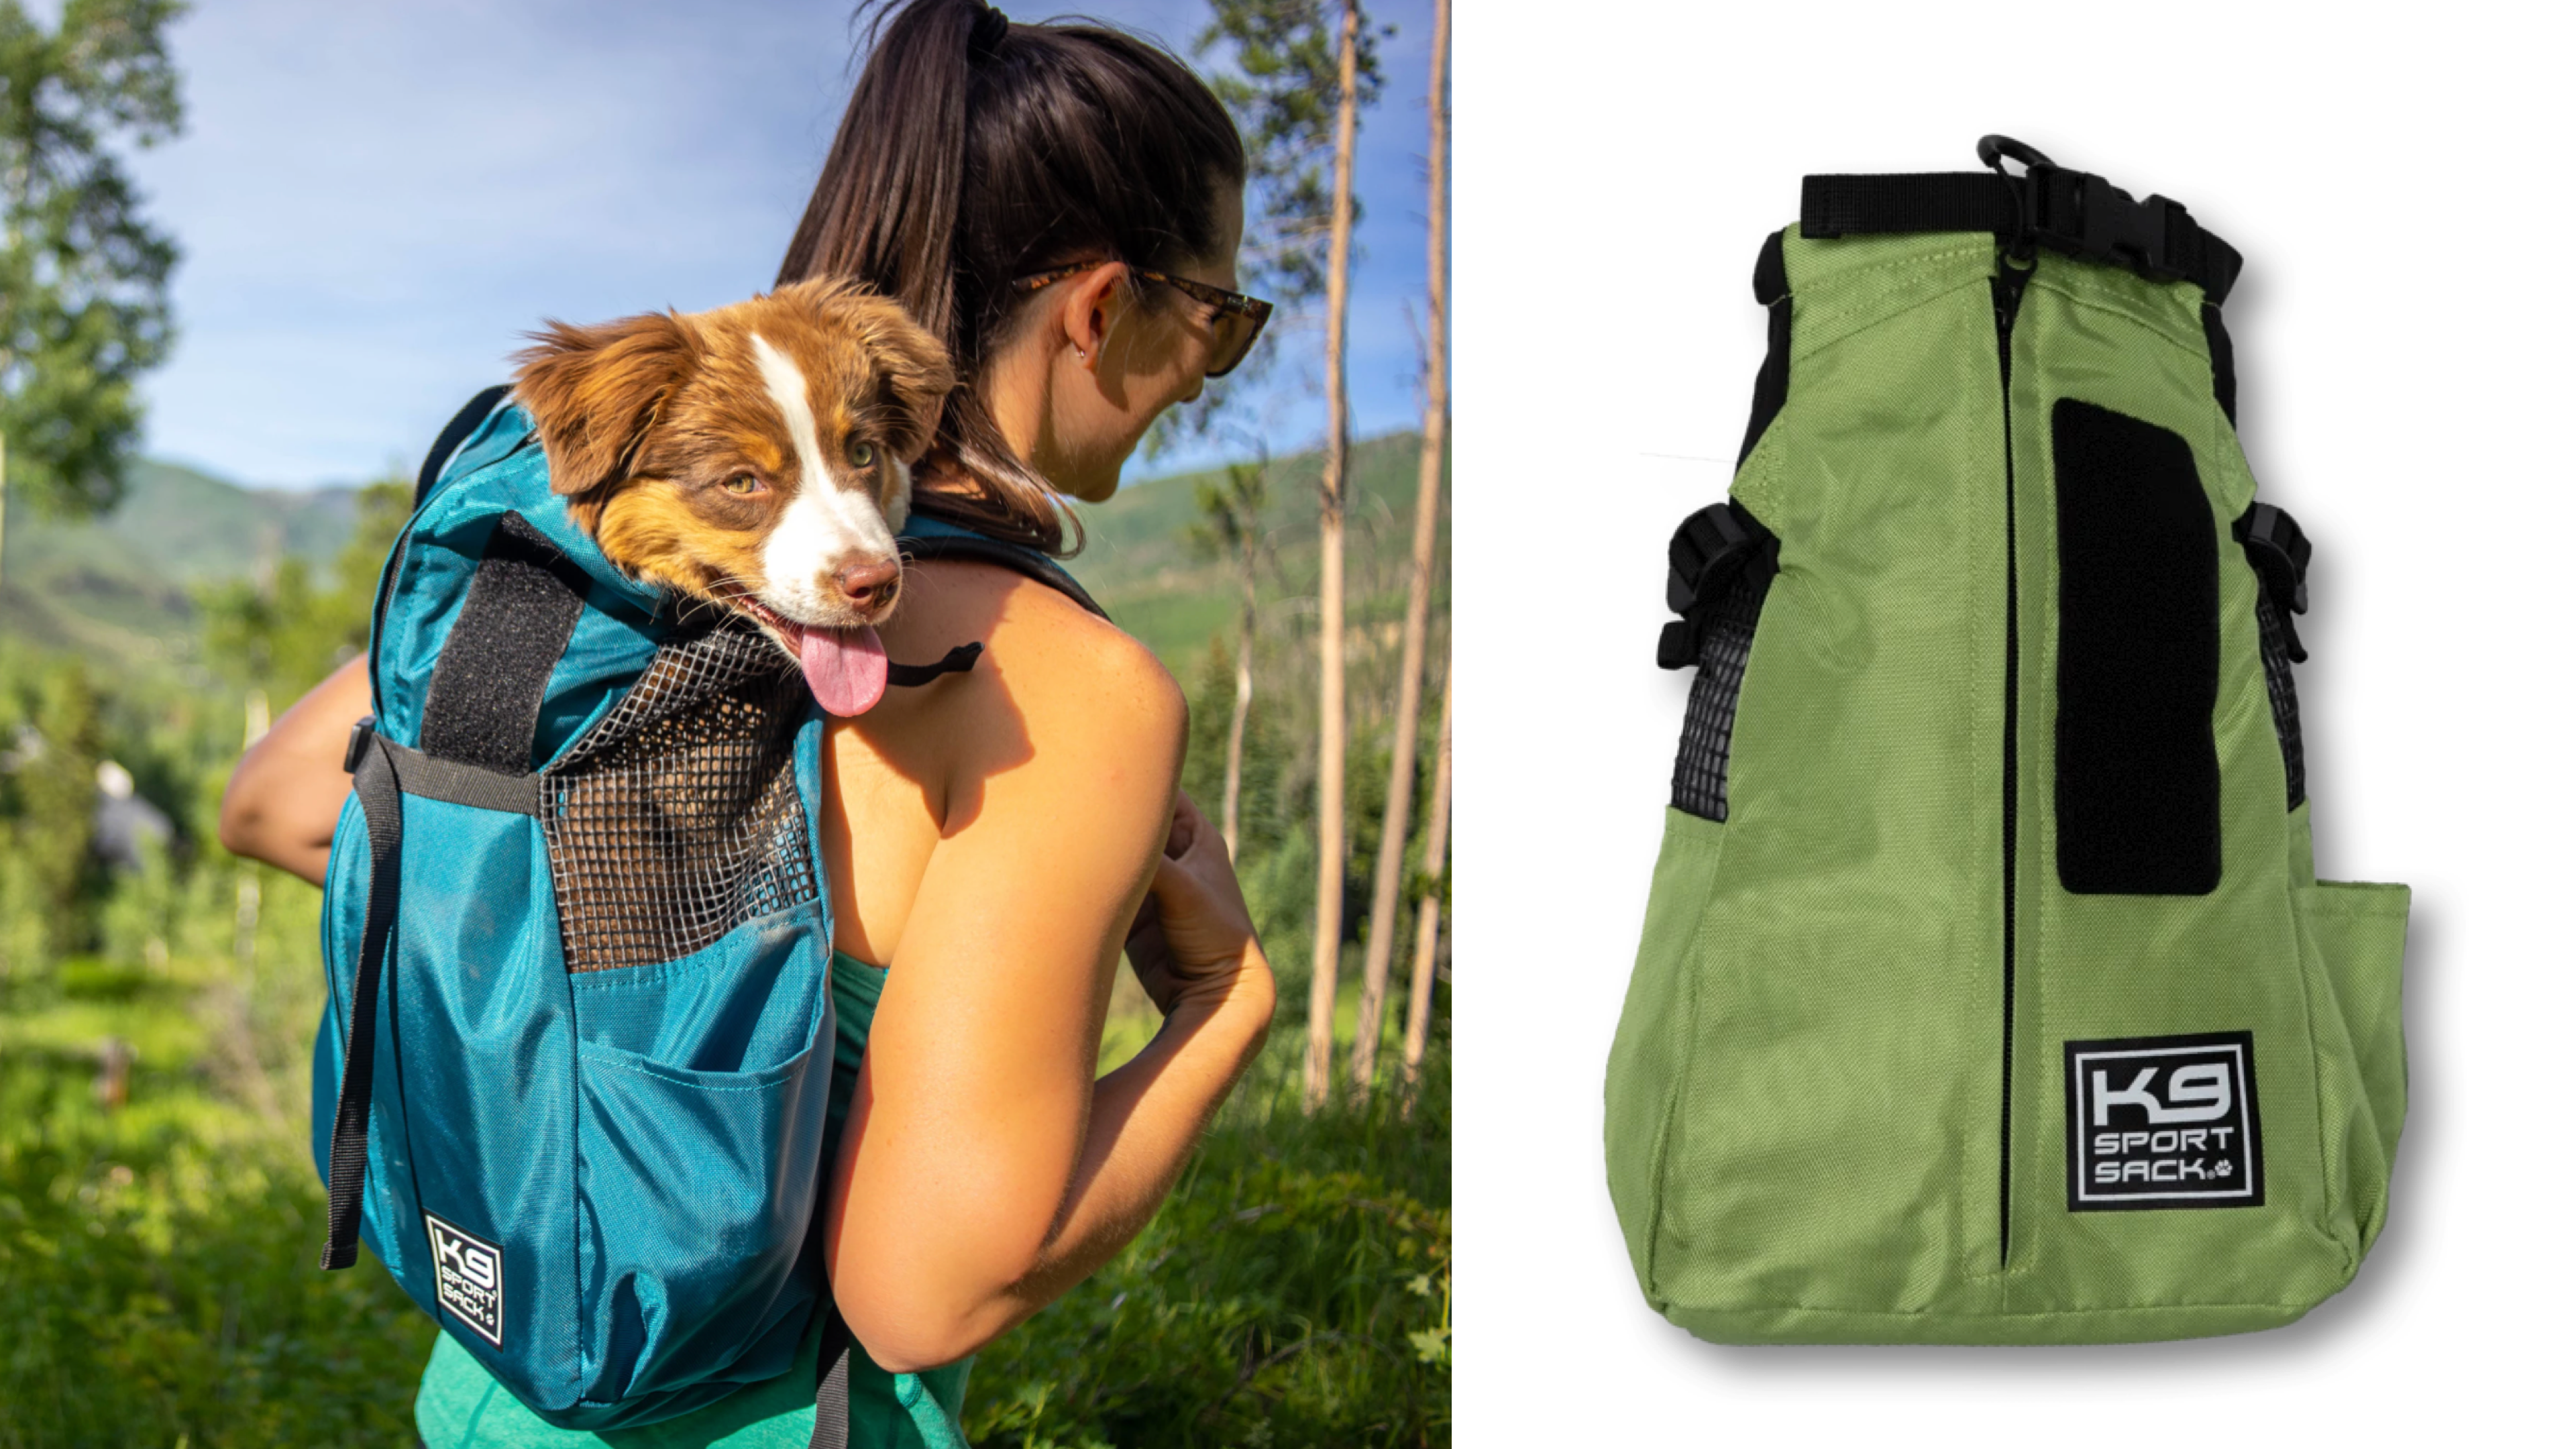 activity backpack for dogs, best for biking and hikes